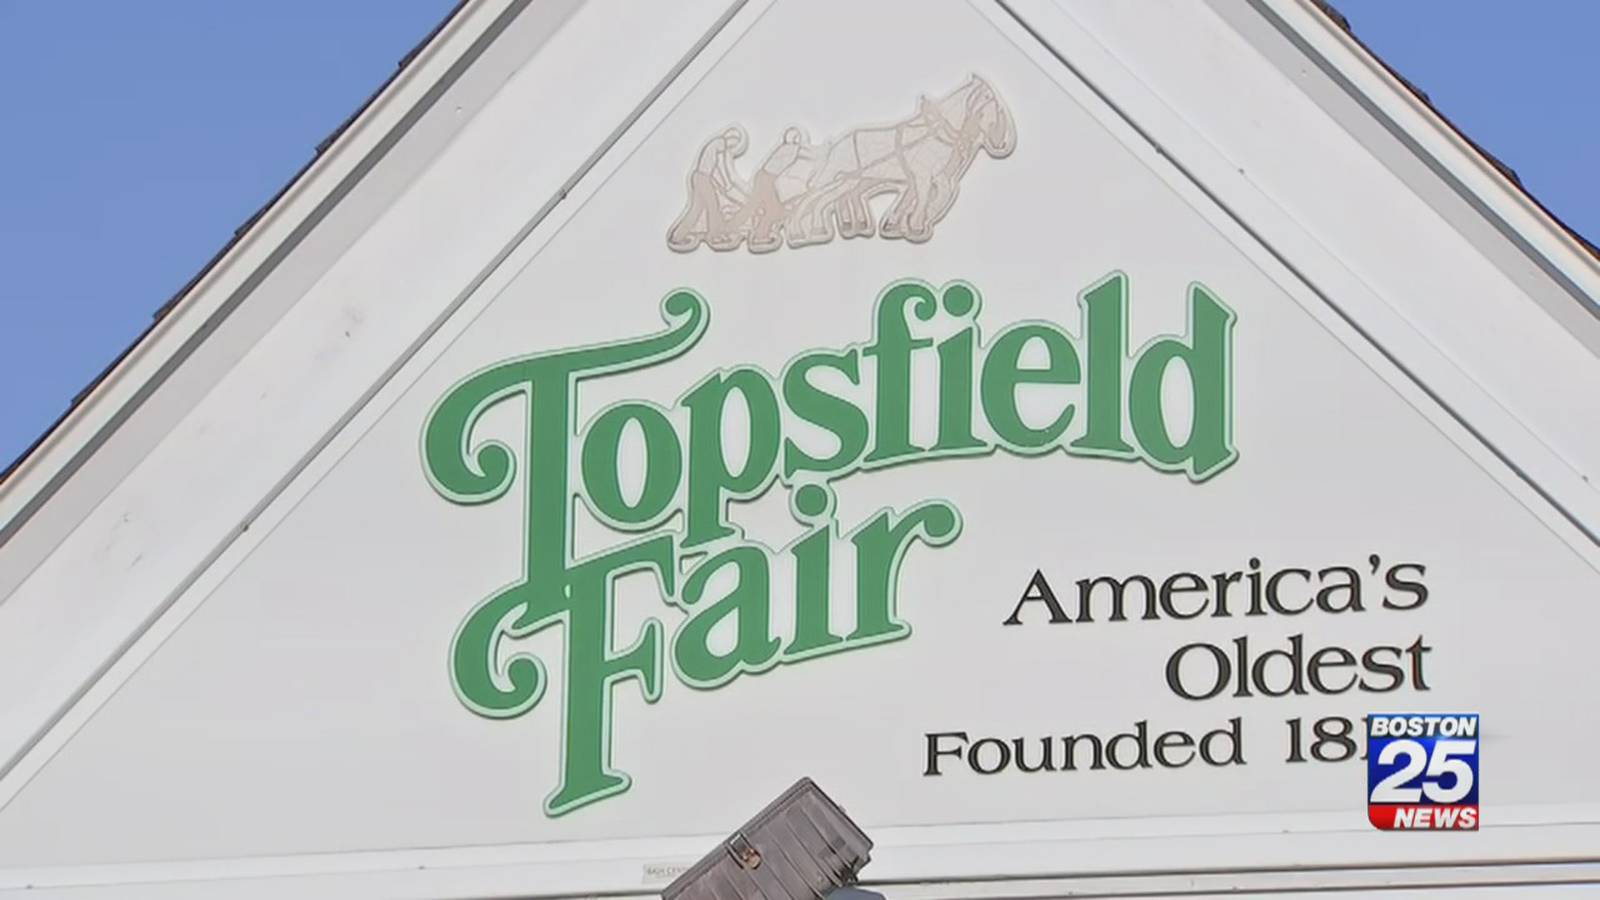 Heading to the Topsfield Fair? You’ll need to wear a mask inside